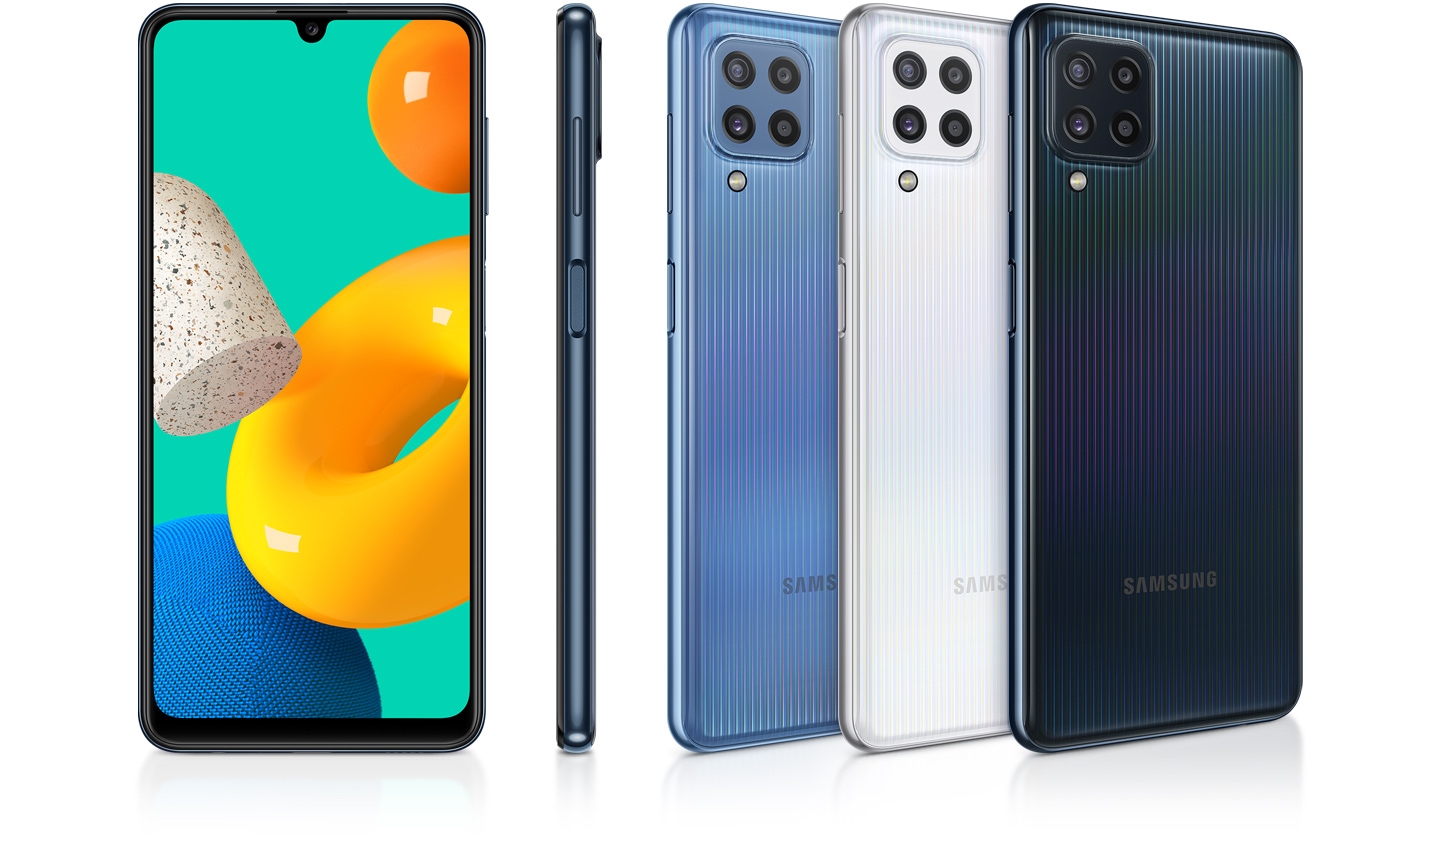 Five devices are displayed to appeal their colors and design. Three reversed ones are in sky blue, white and black; while one is looking at the front and another showing the right side of device.